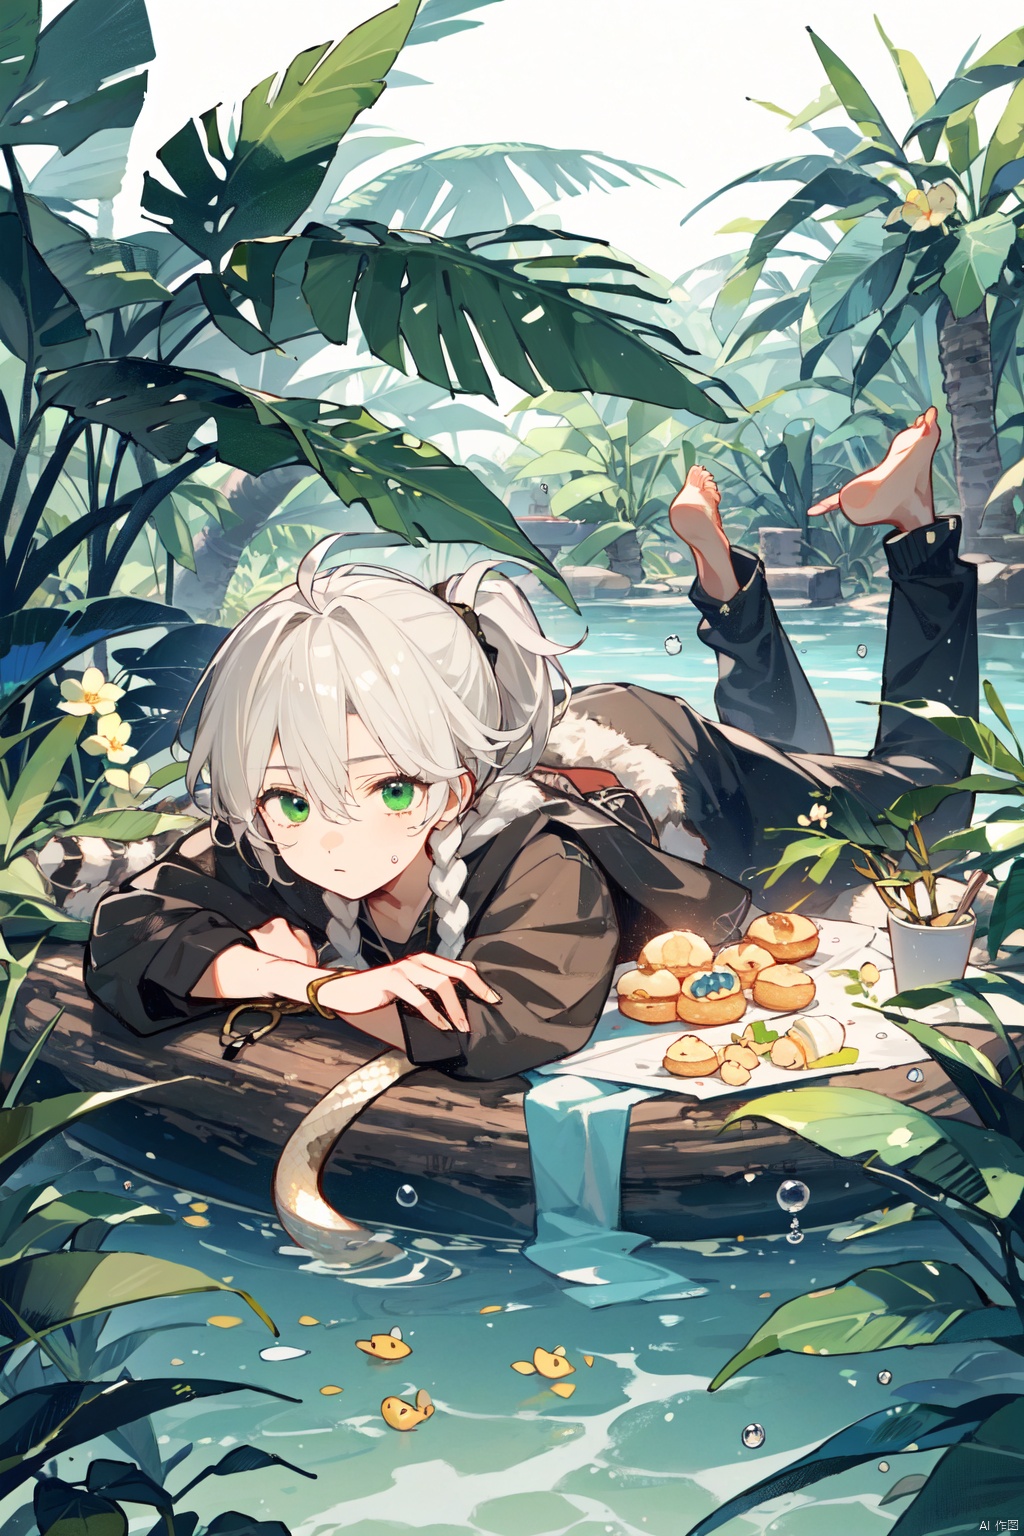 Teenager, male, rainforest, cane, collapsed tree trunk, boy lying on the tree trunk, white hair, green eyes, water, ponytail, snake pupil, small Fried Dough Twists braids on the temples, brown clothes, primitive jungle style